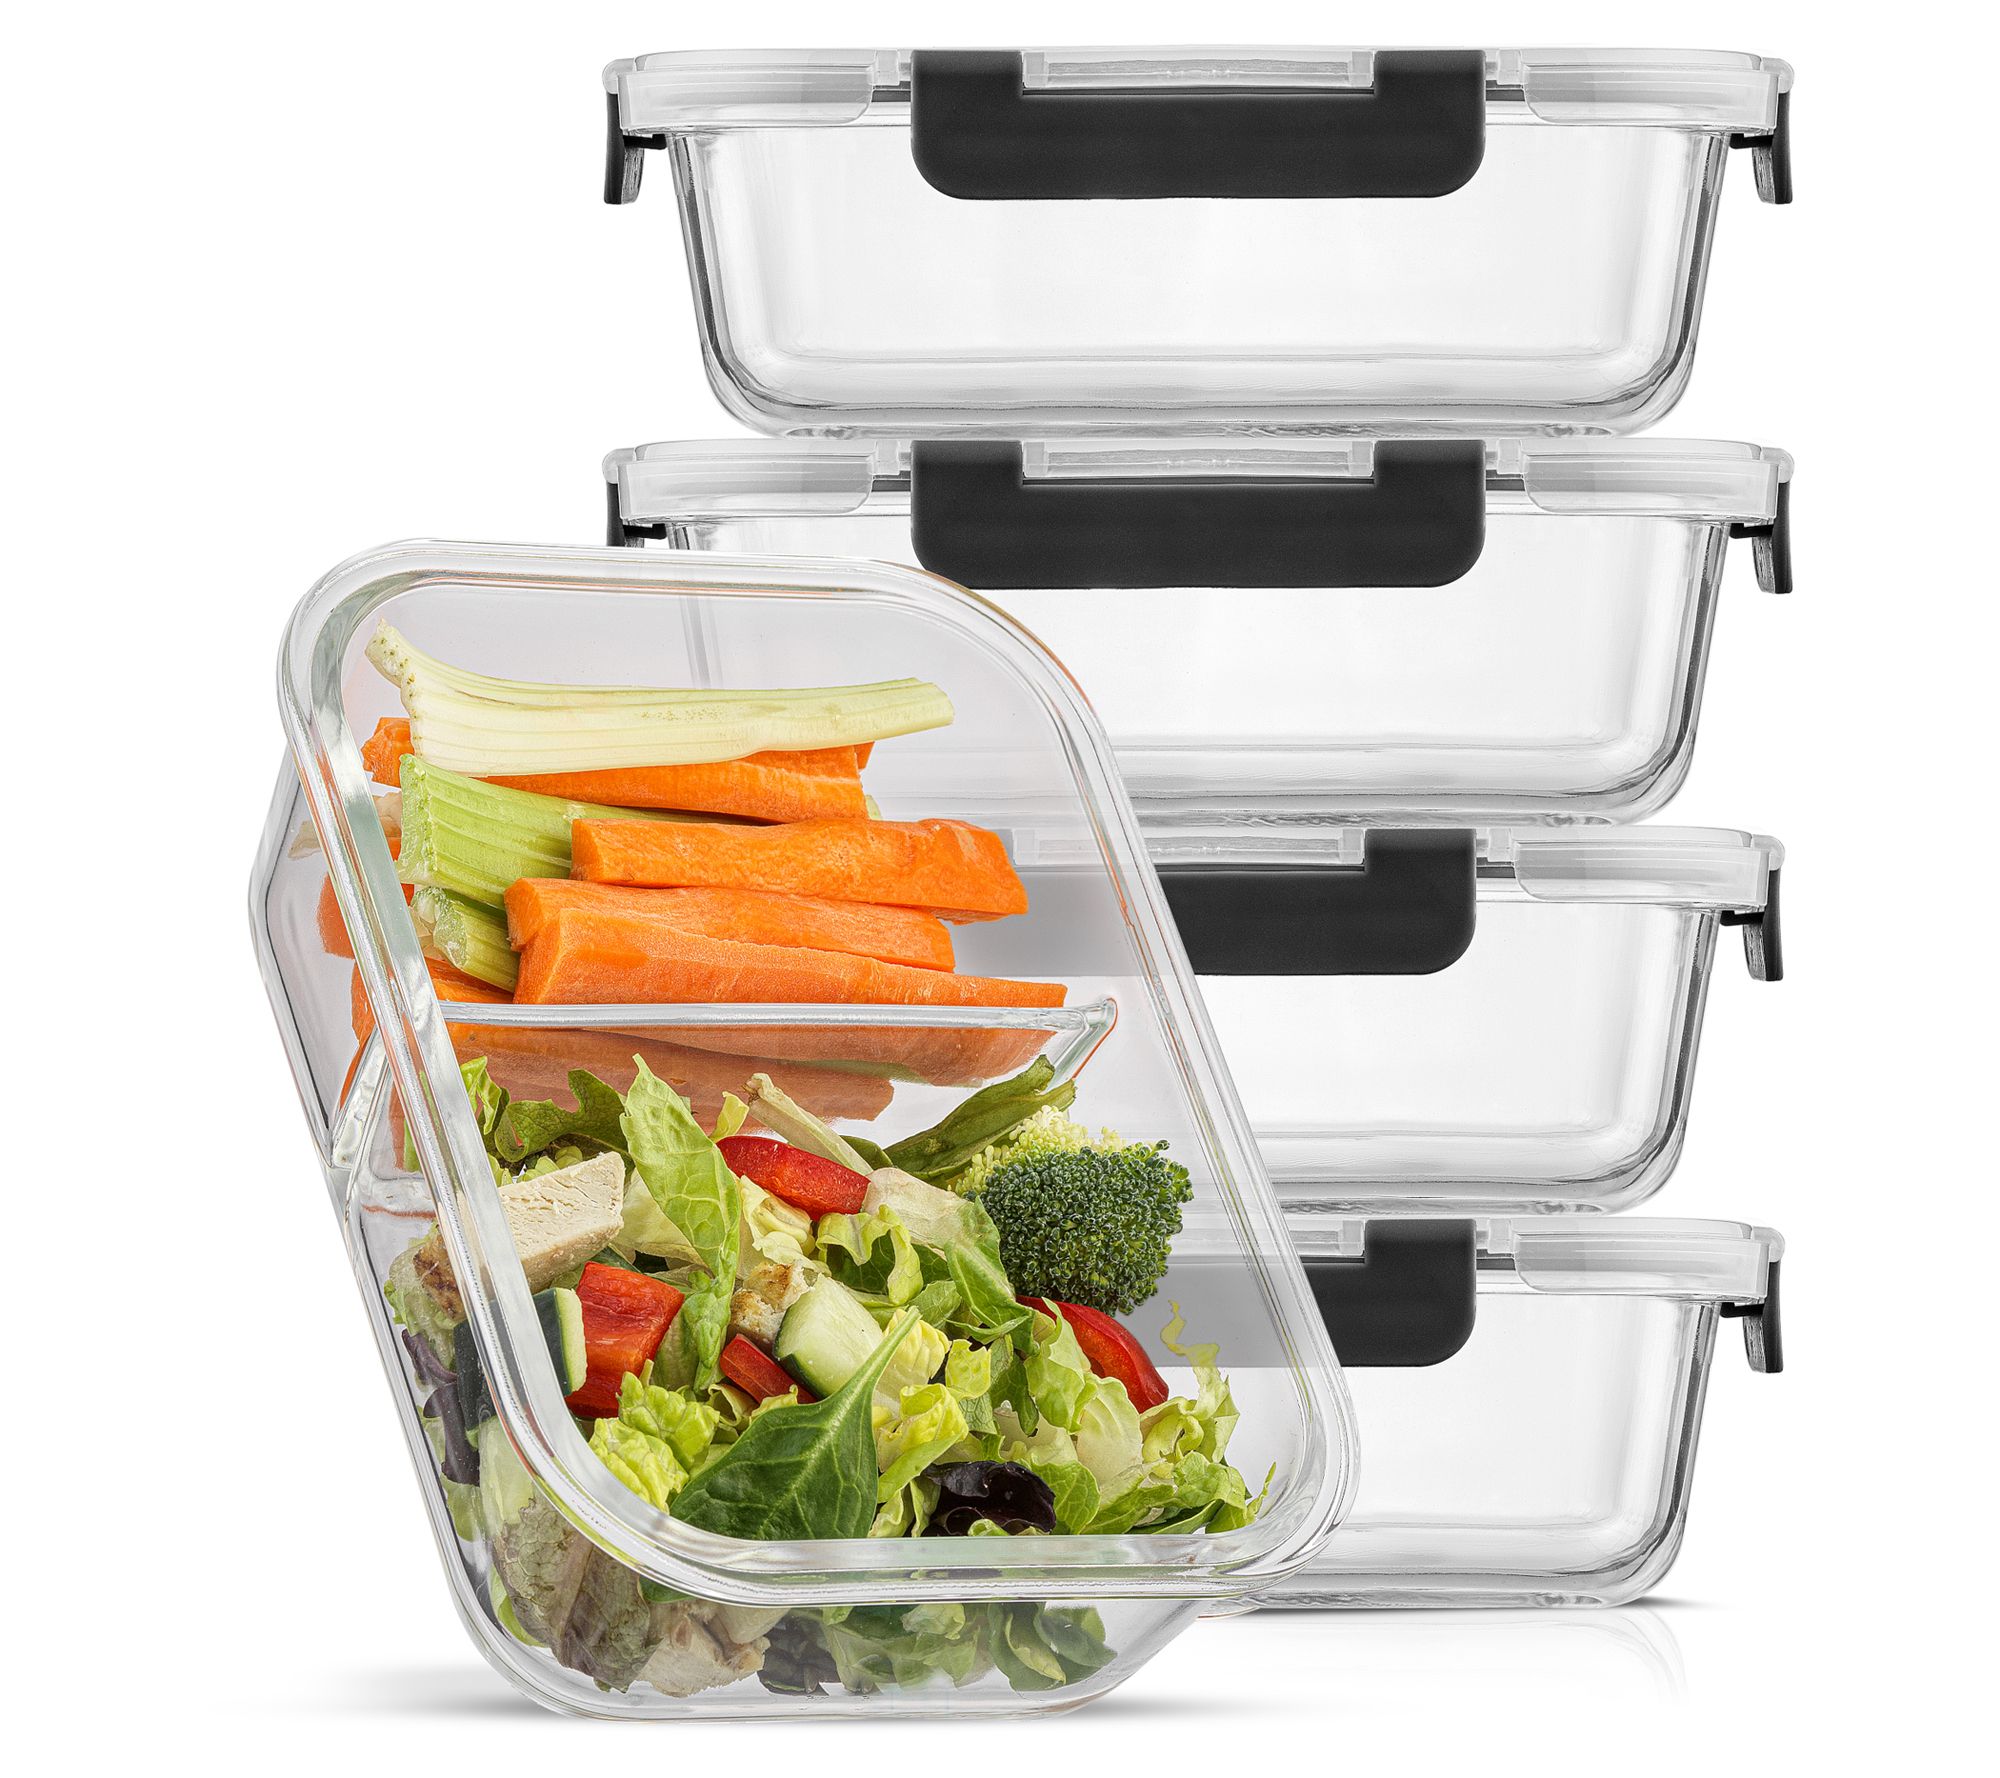 JoyJolt Glass Food Storage Containers Set of 6 with Lids